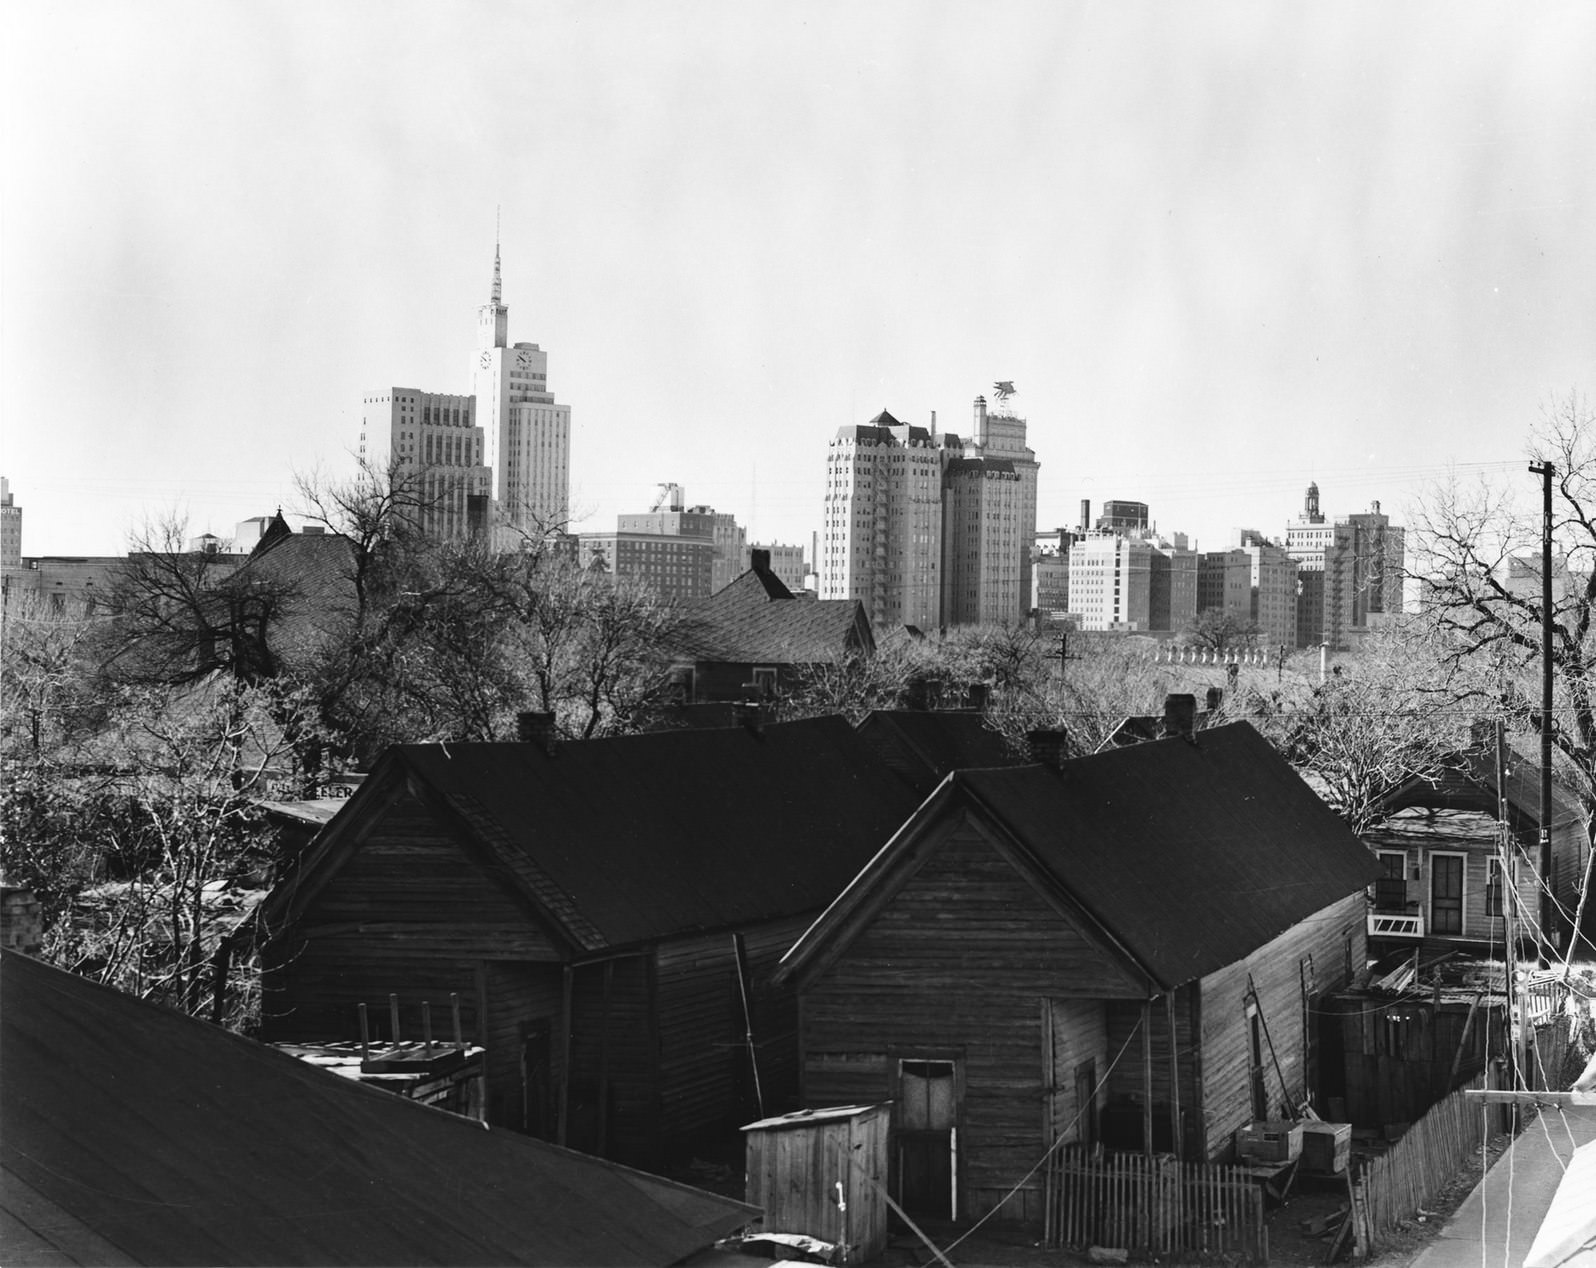 Skyline of downtown Dallas, Texas from the backyards of tenement houses, 1950